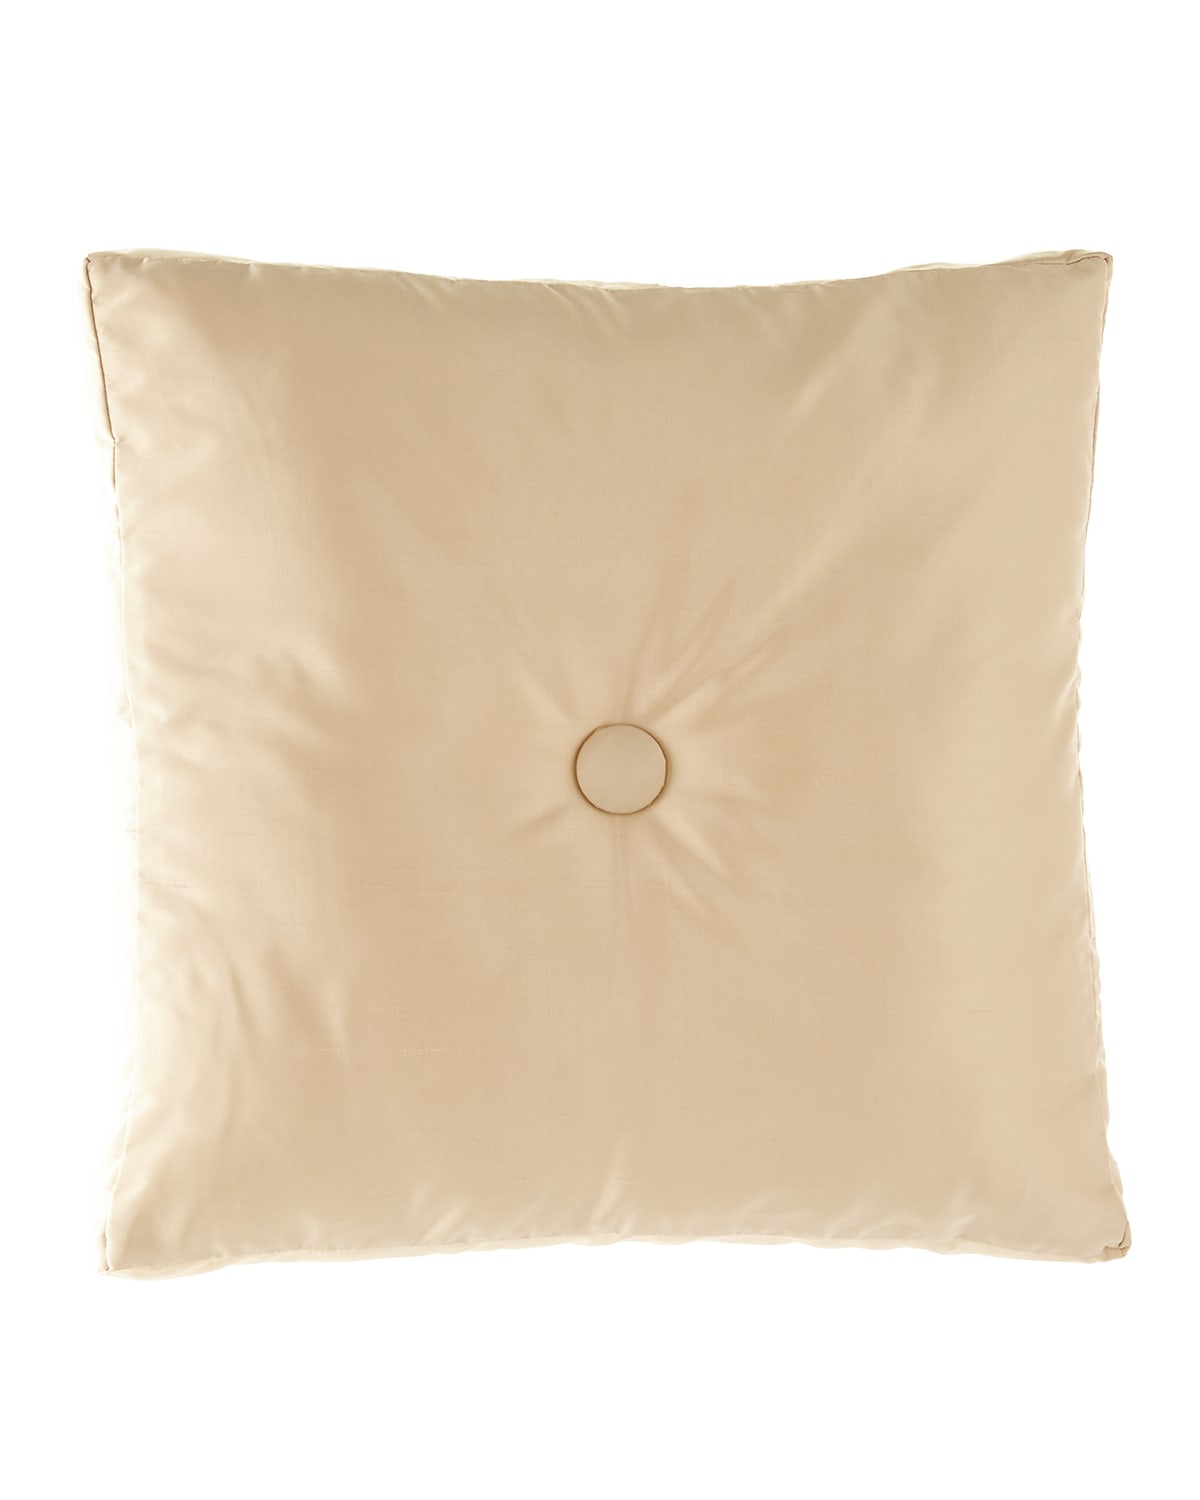 Image Dian Austin Couture Home Circumference Silk Pillow with Button Center